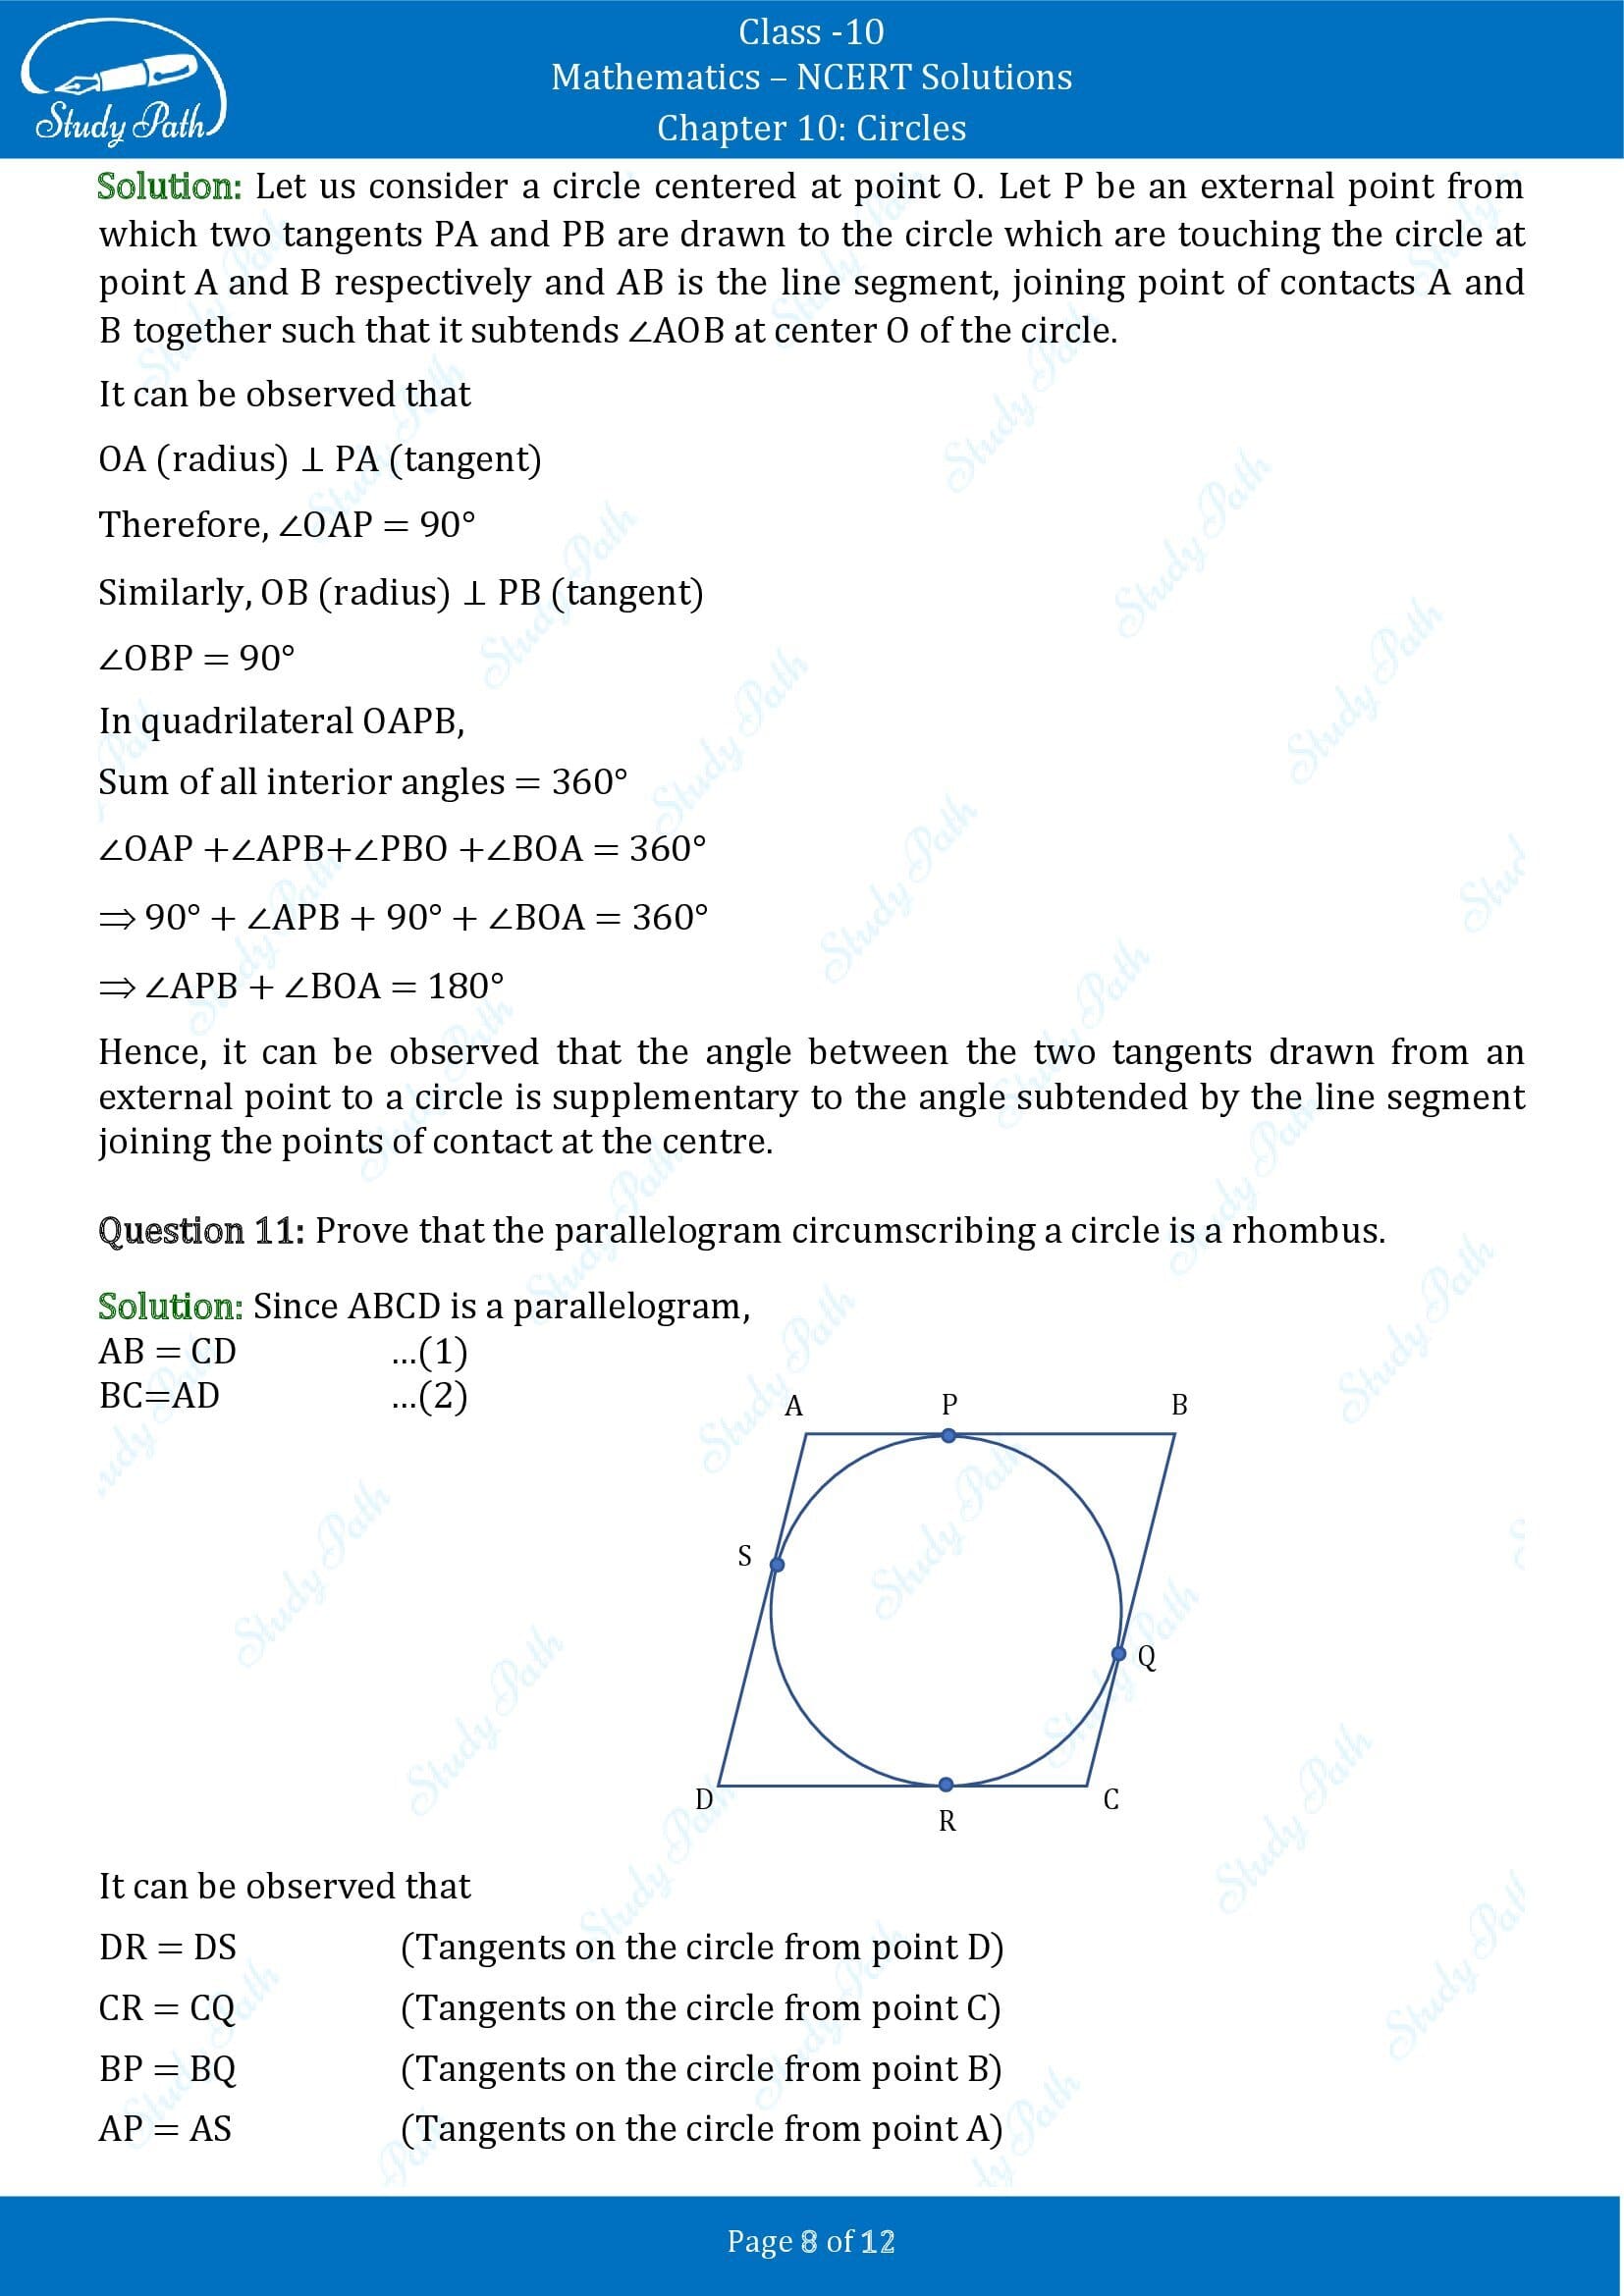 NCERT Solutions for Class 10 Maths Chapter 10 Circles Exercise 10.2 00008